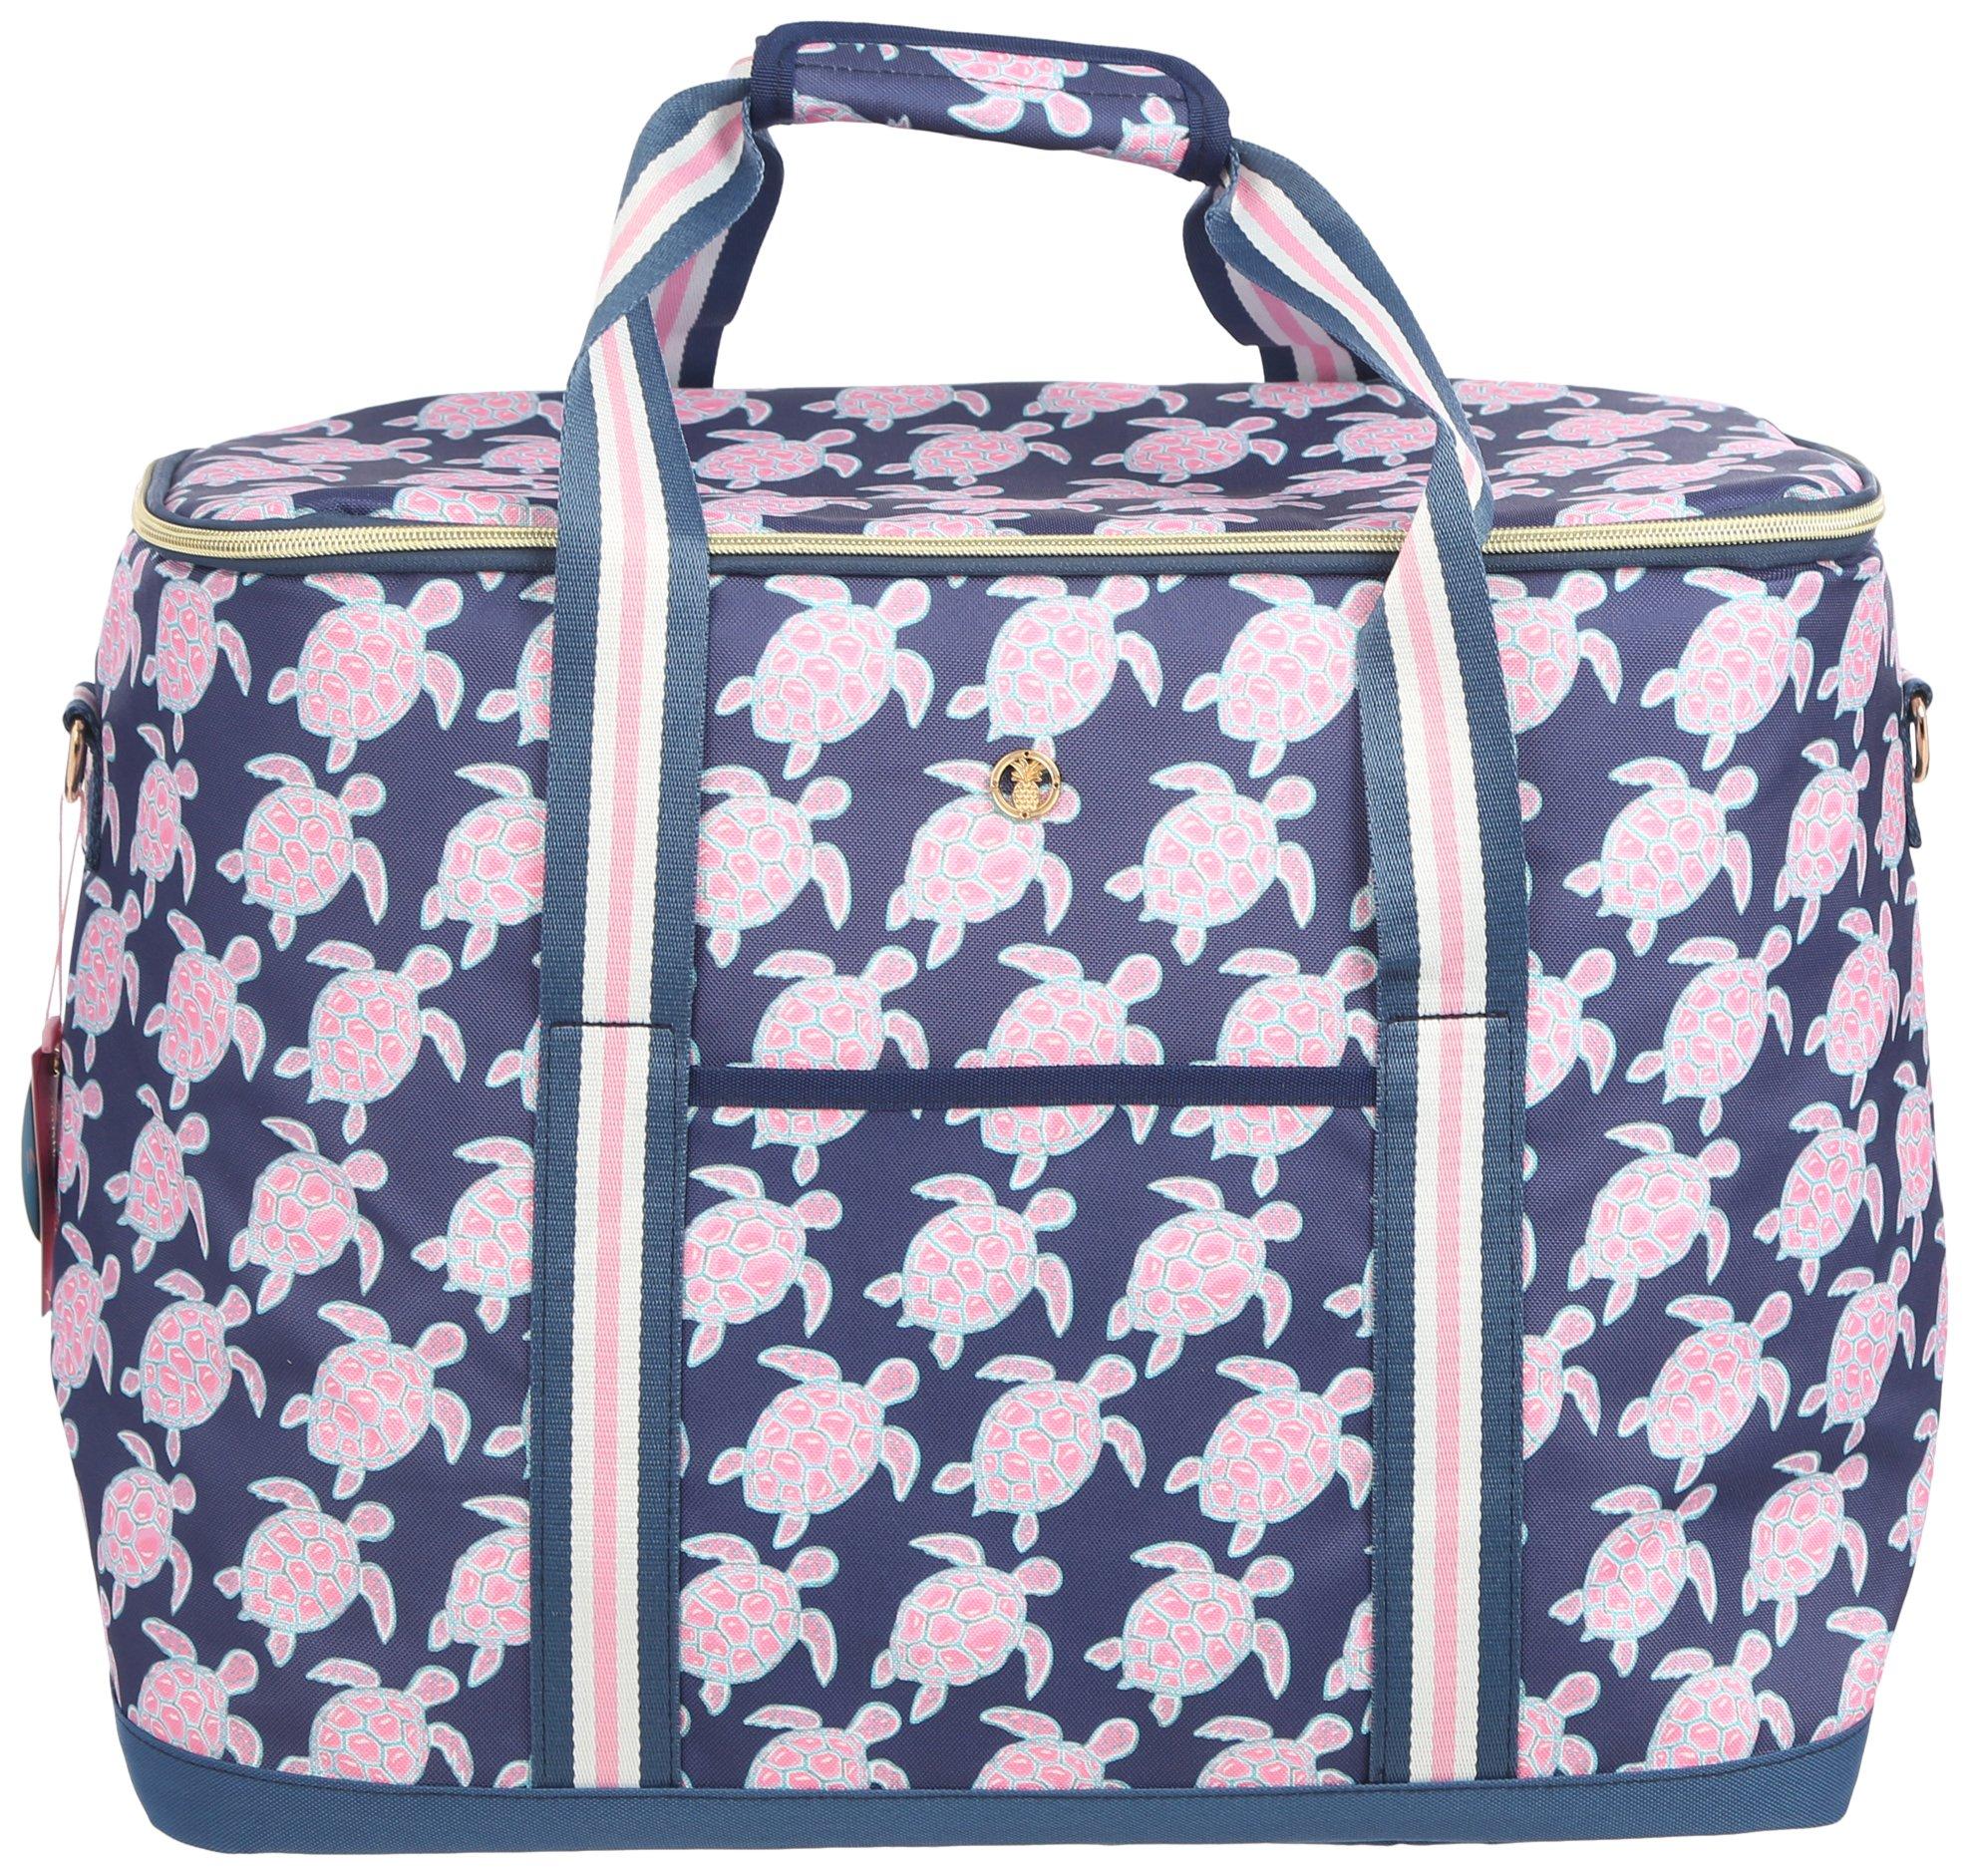 Simply Southern Sea Turtle Print Cooler Tote